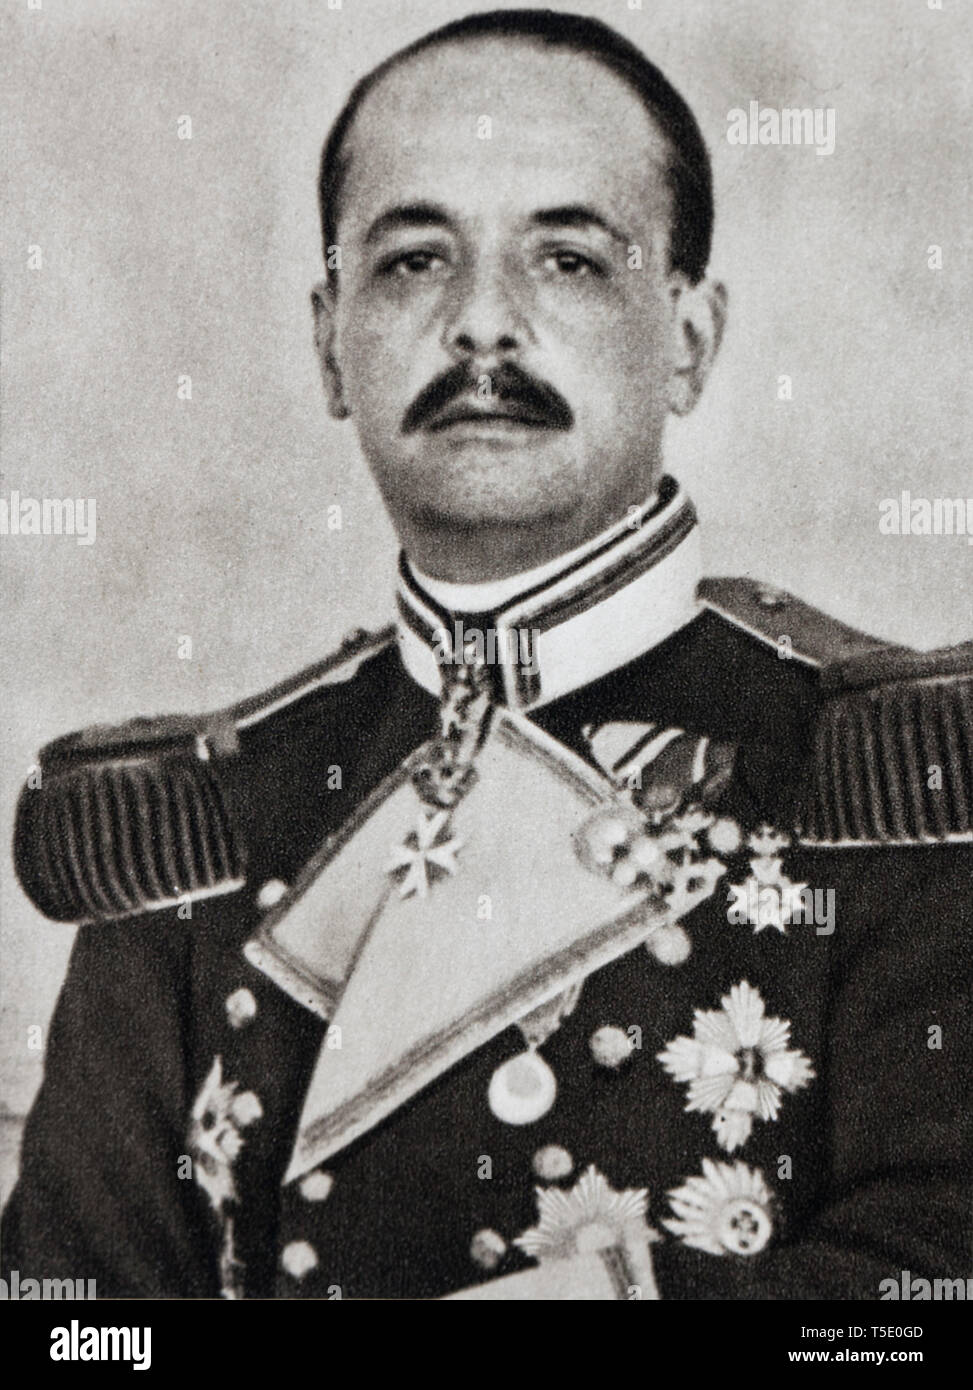 Count Stefan Csaky who served as Minister of Foreign Affairs of Hungary between 1938 and 1941. Stock Photo